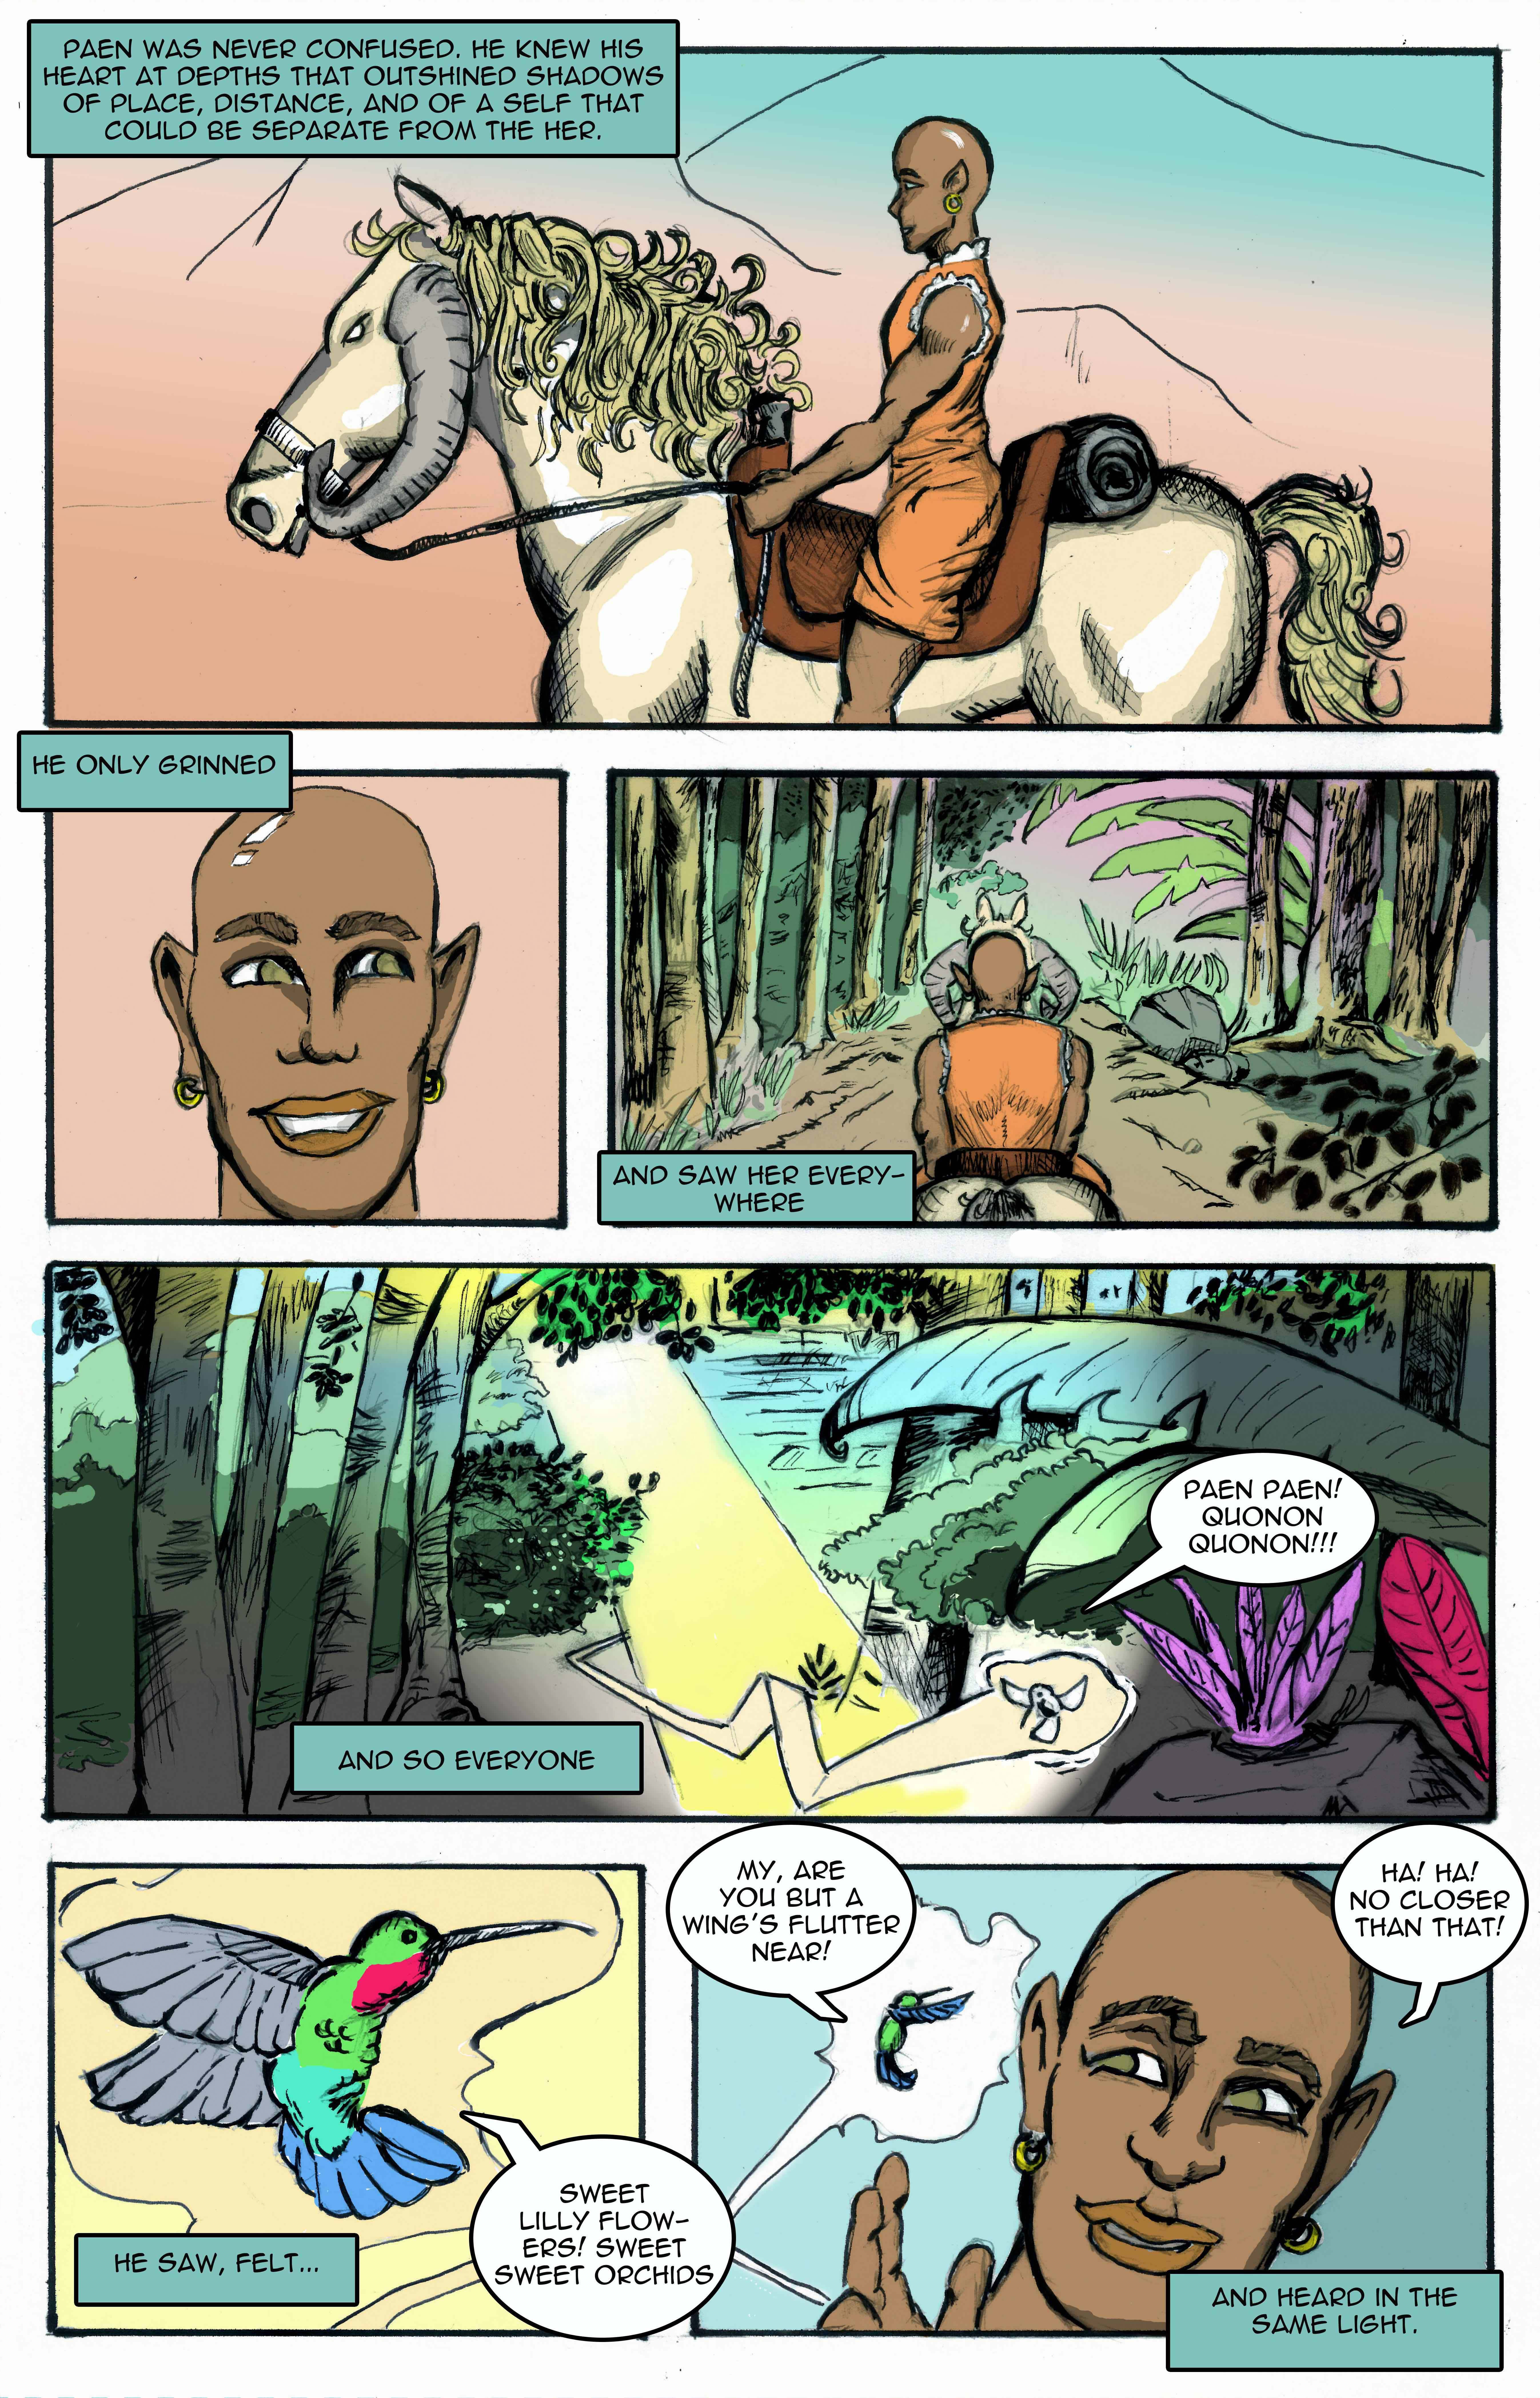 Dreamers of the Great One Land (page 15)